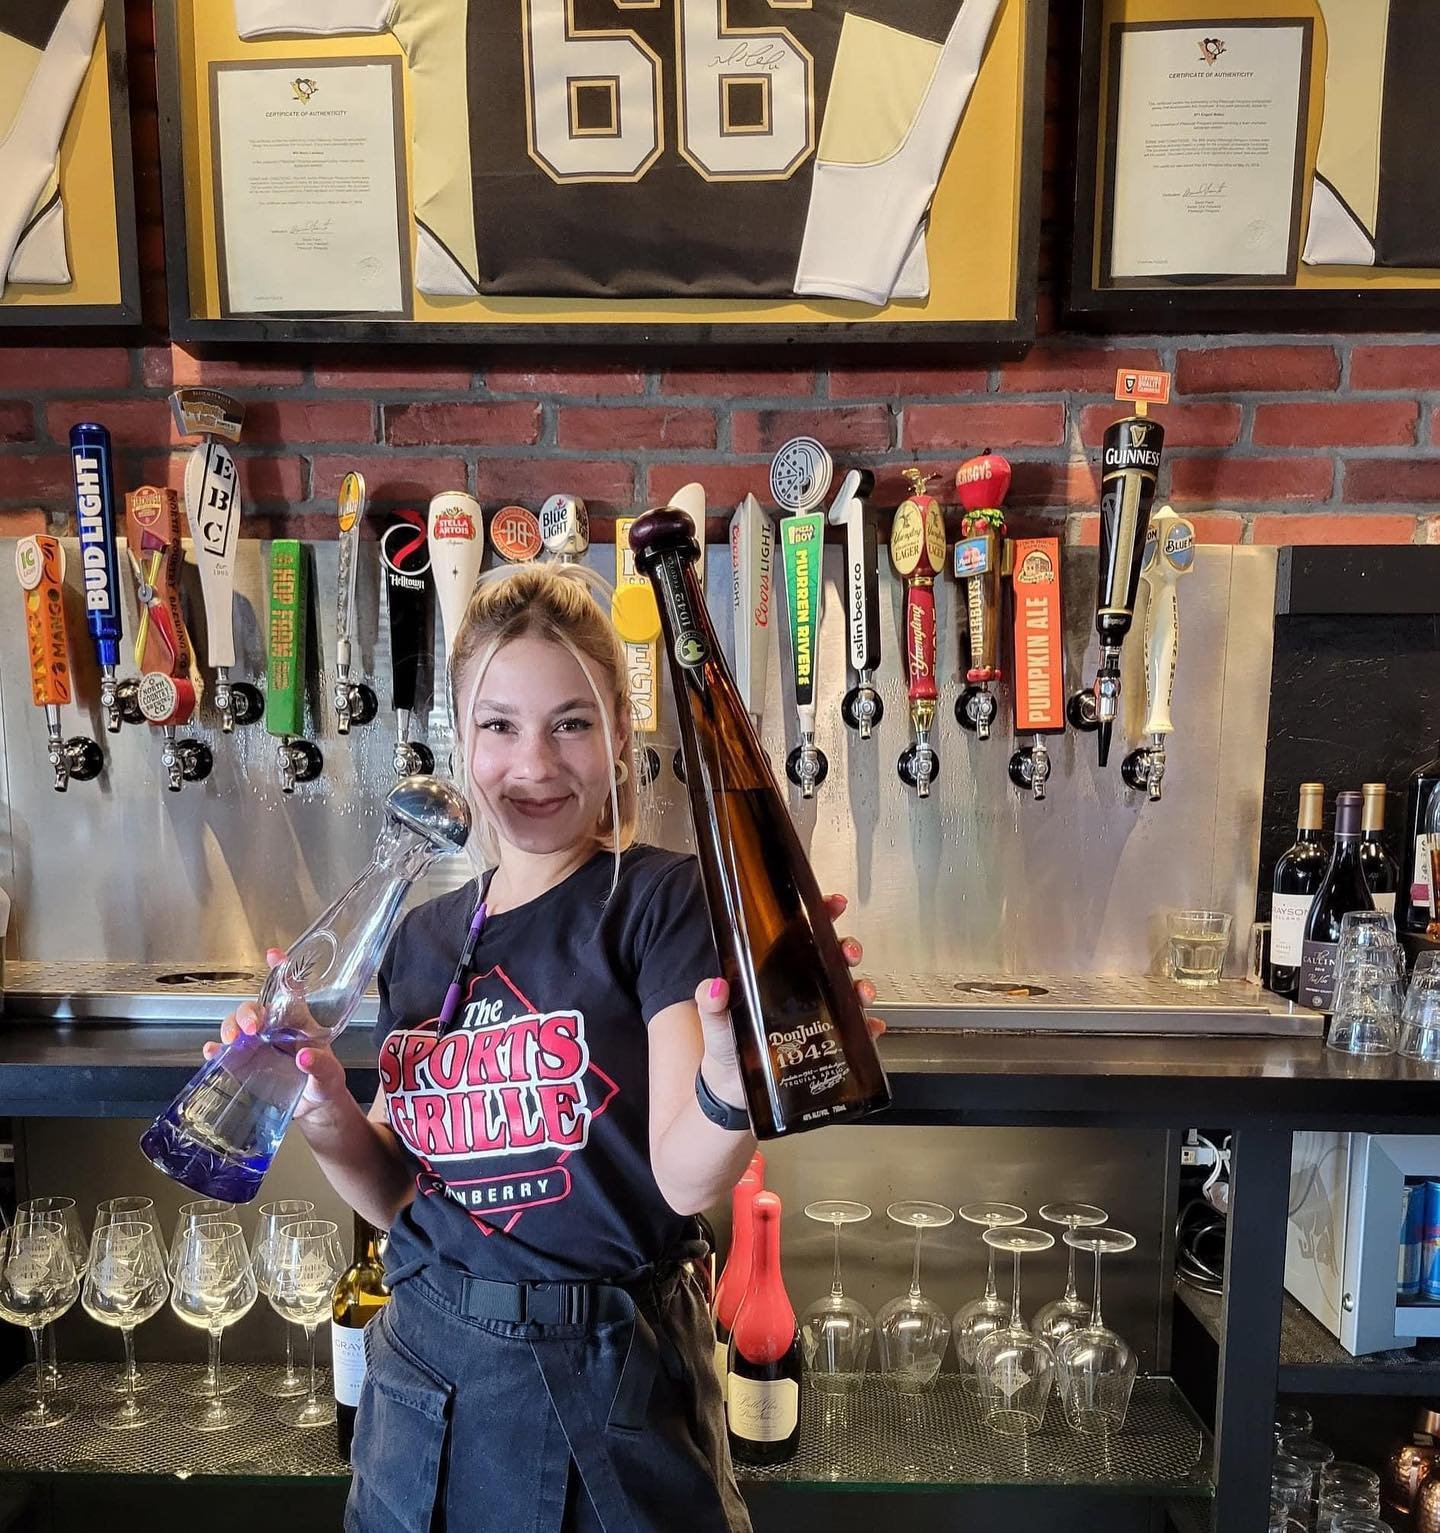 🎉 Happy Mother&rsquo;s Day! 🌷 Cheers to all the amazing moms! Join us in celebrating at @thesportsgrilleatcranberry! Locally owned by Sean Pregibon, sporting a delicious menu, wonderful atmosphere, and today all you wonderful mothers out there will